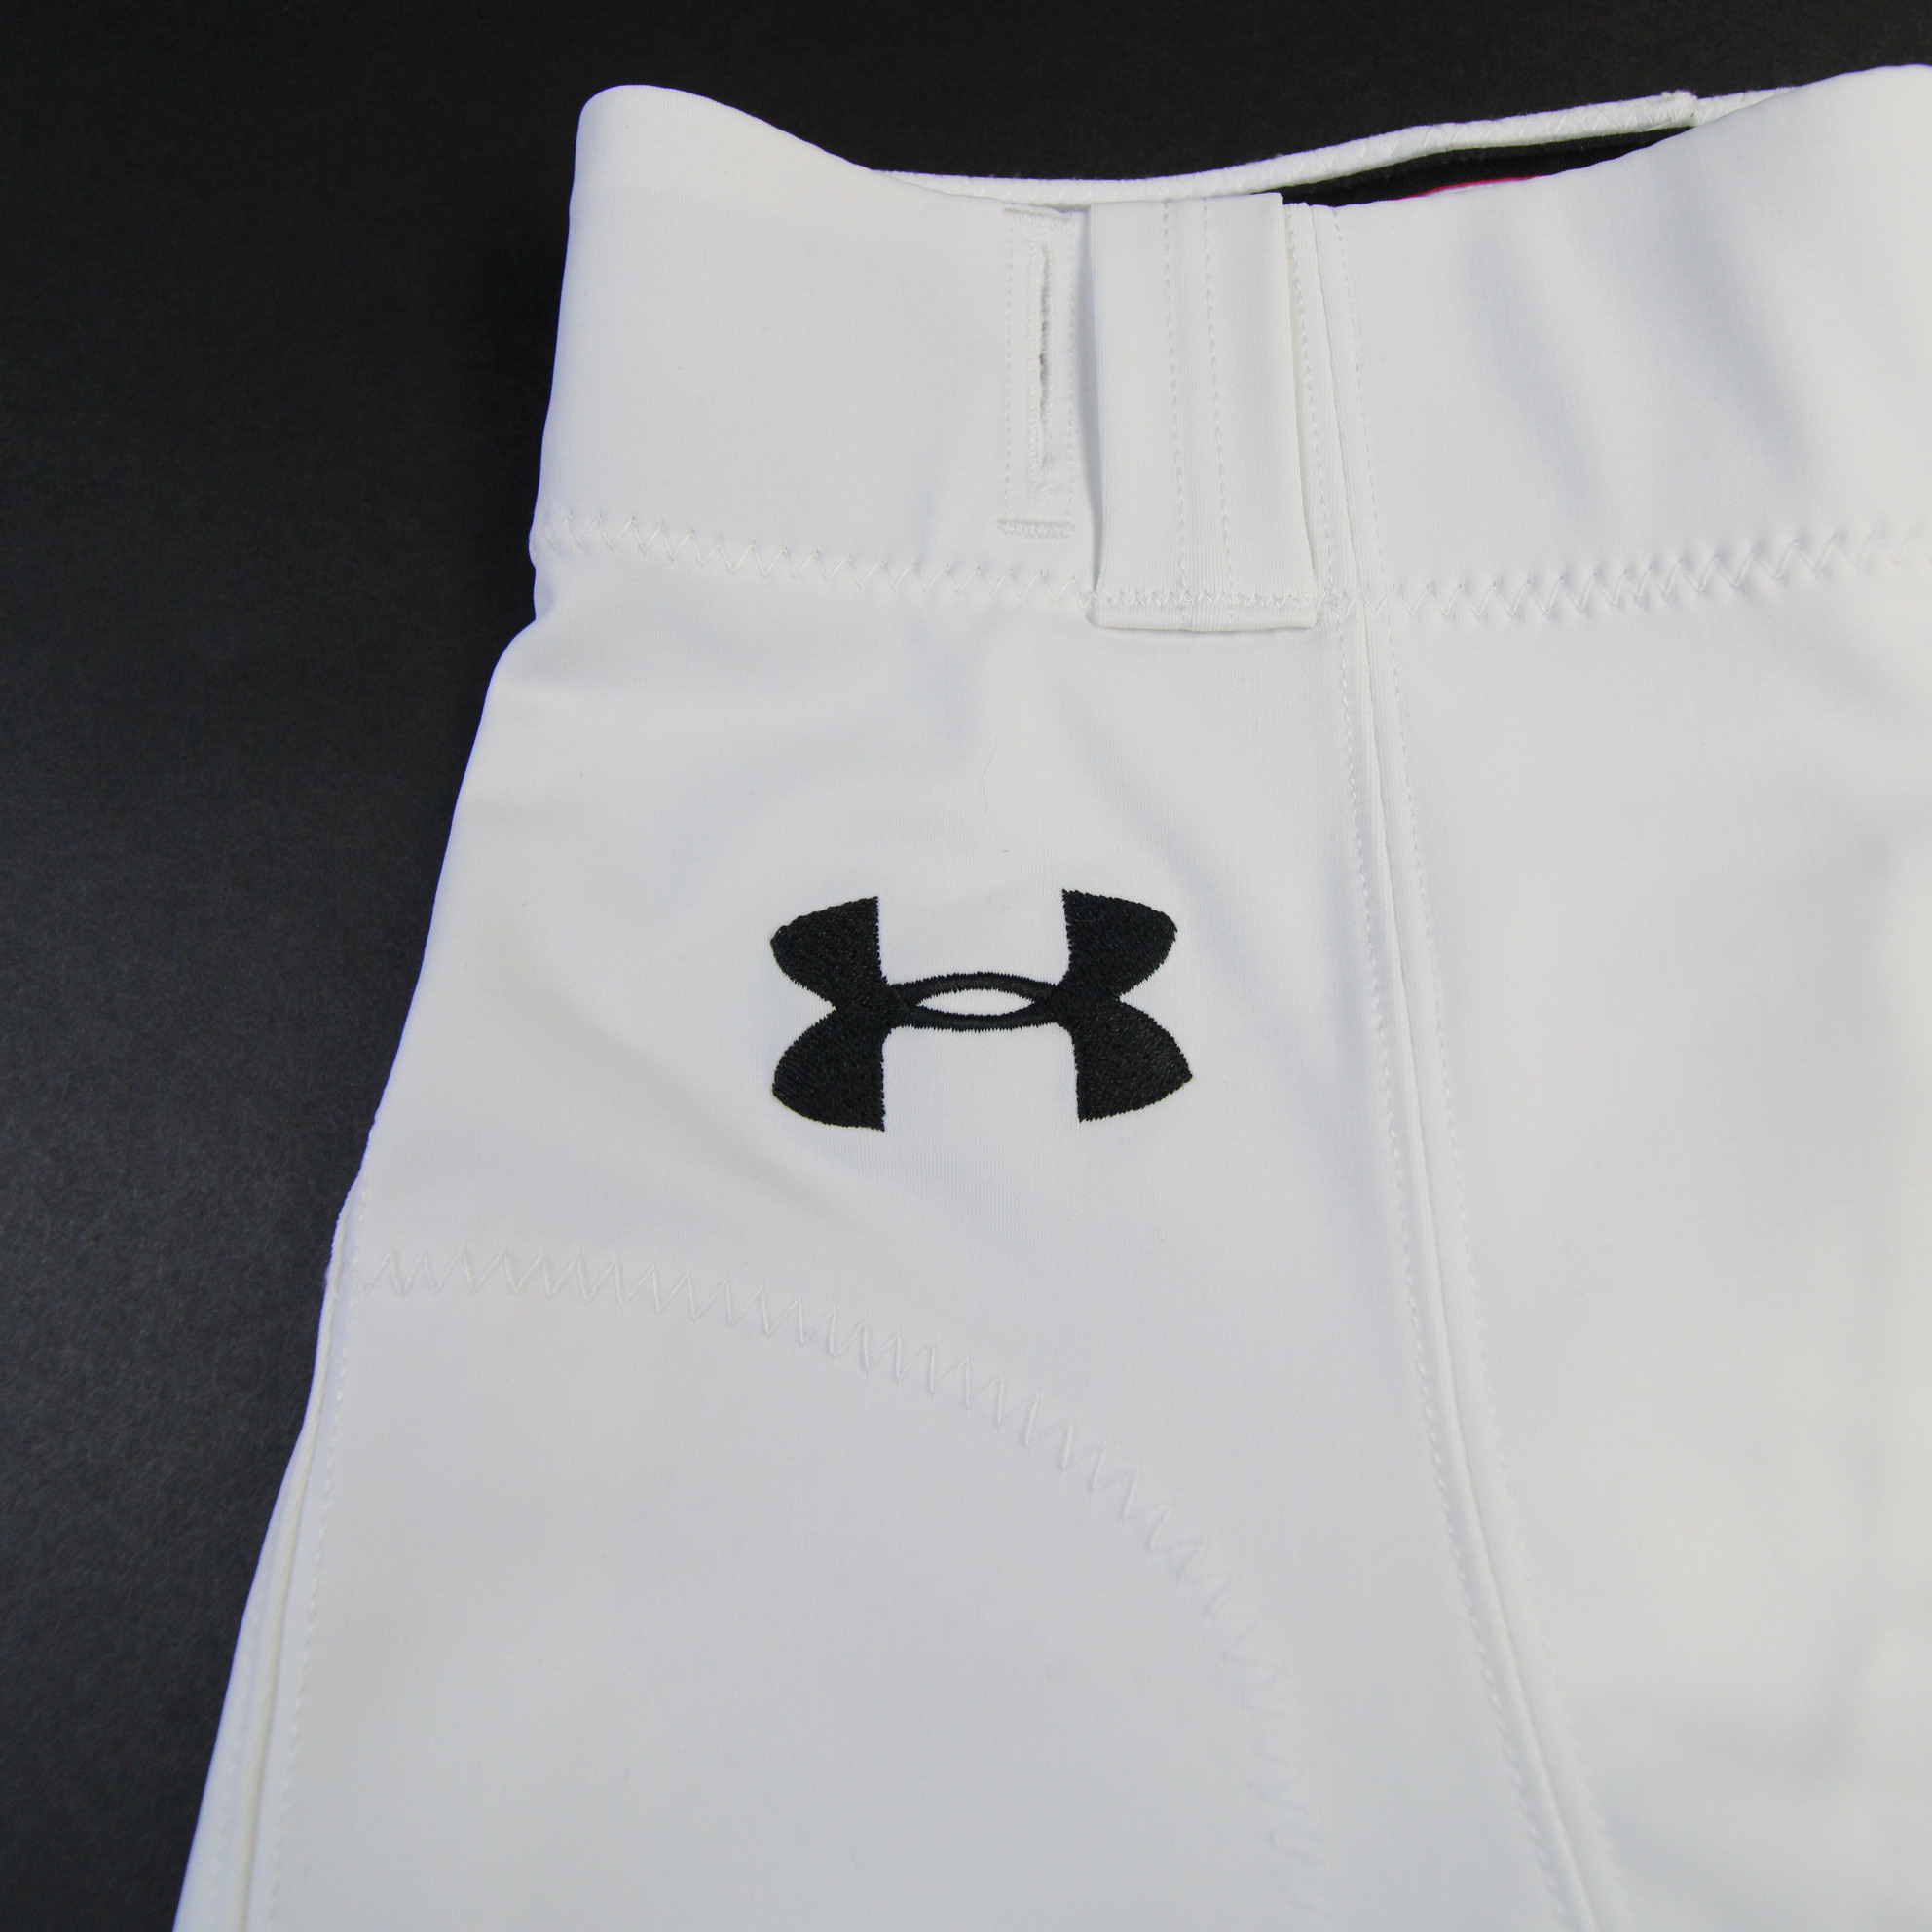 Under Armour Football Pants Men's White New with Tags | eBay